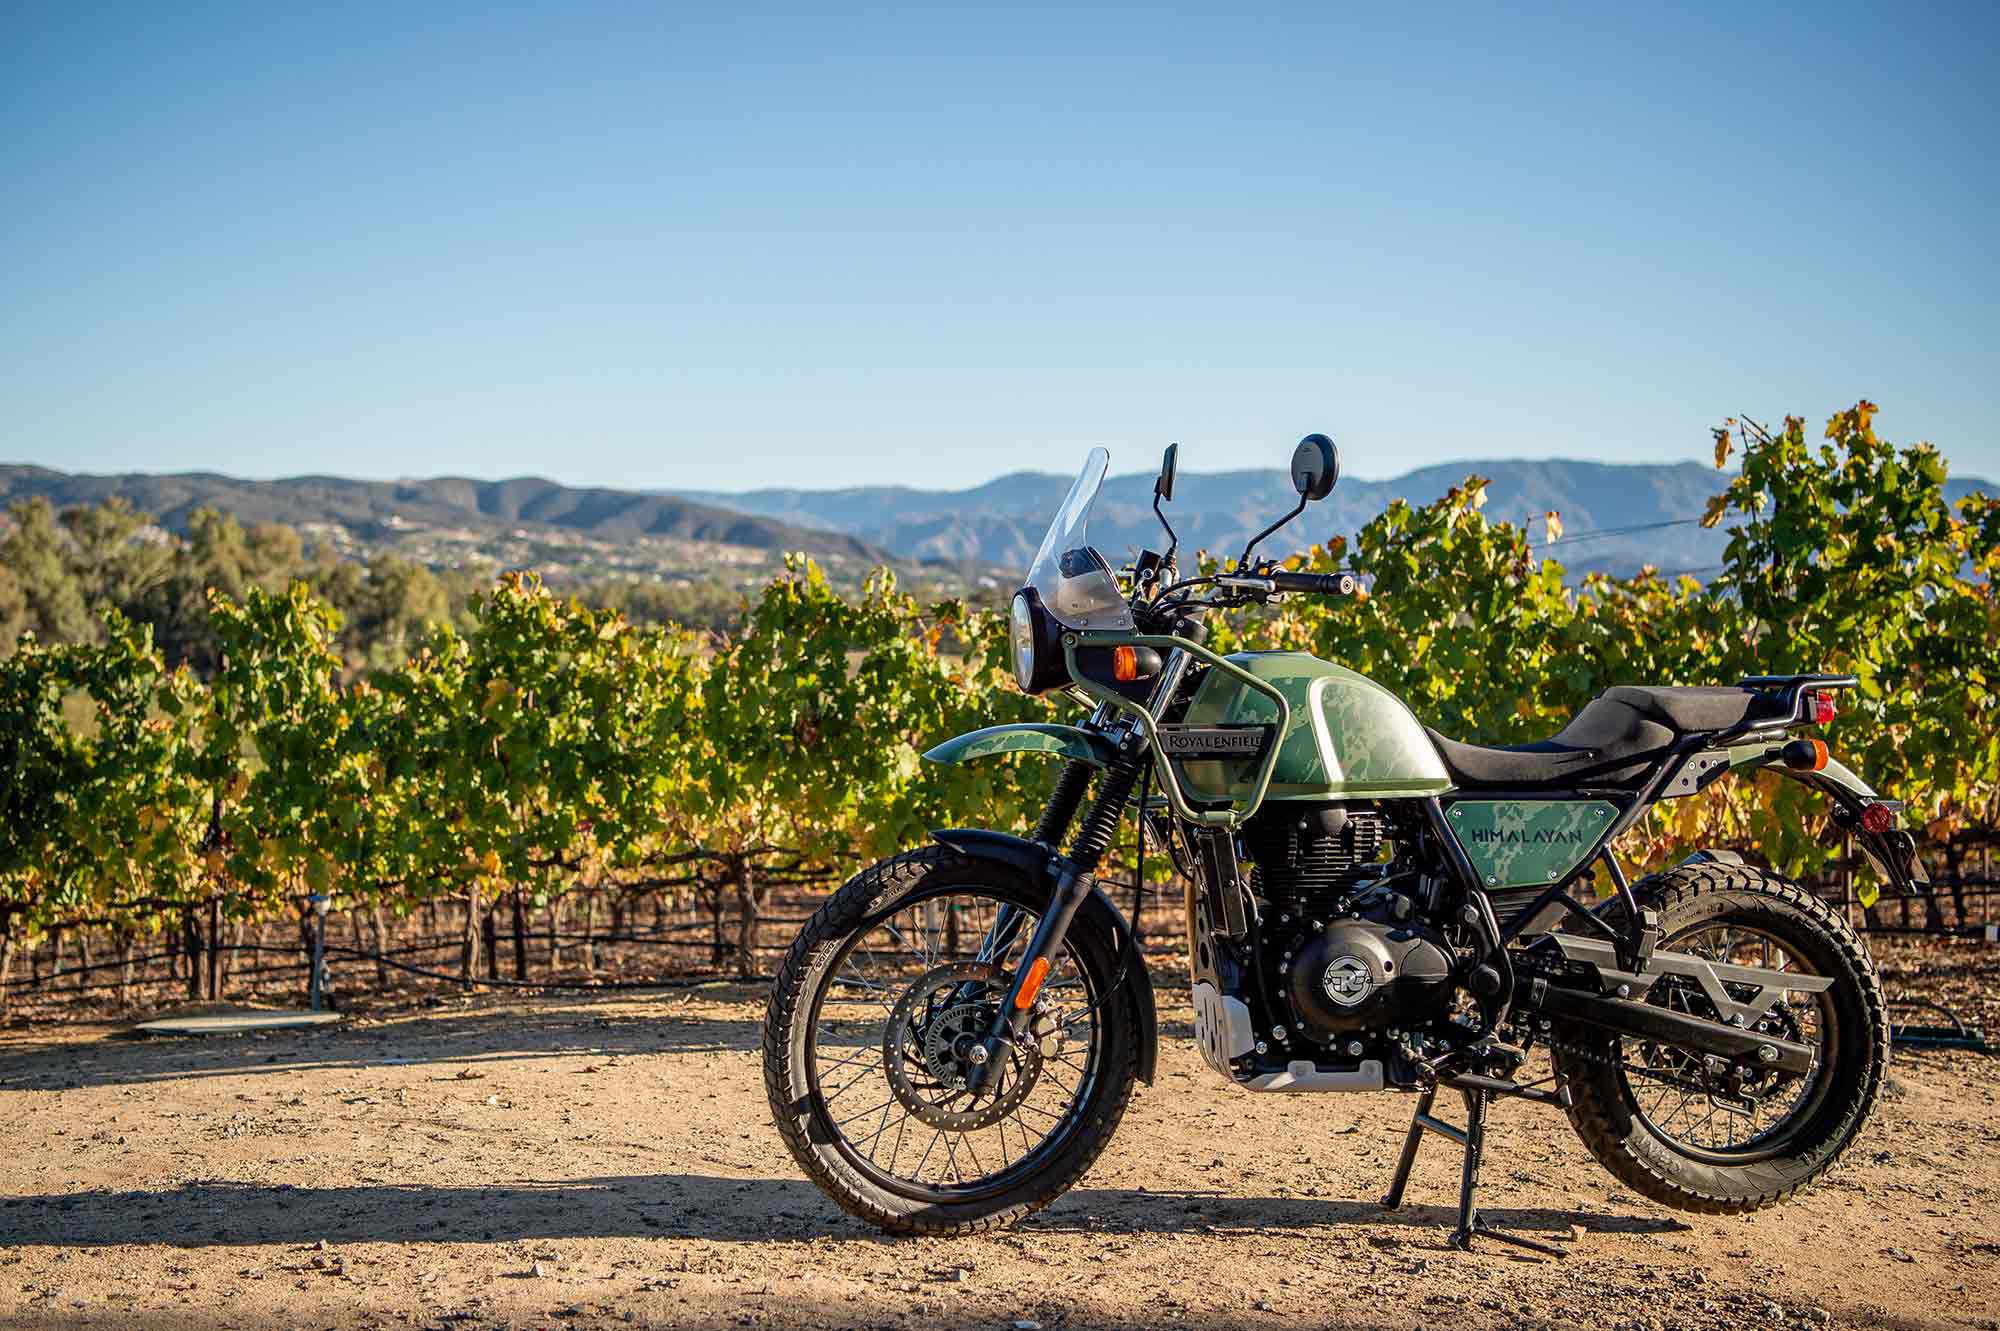 Pine Green is one of the three new color choices for the Himalayan.